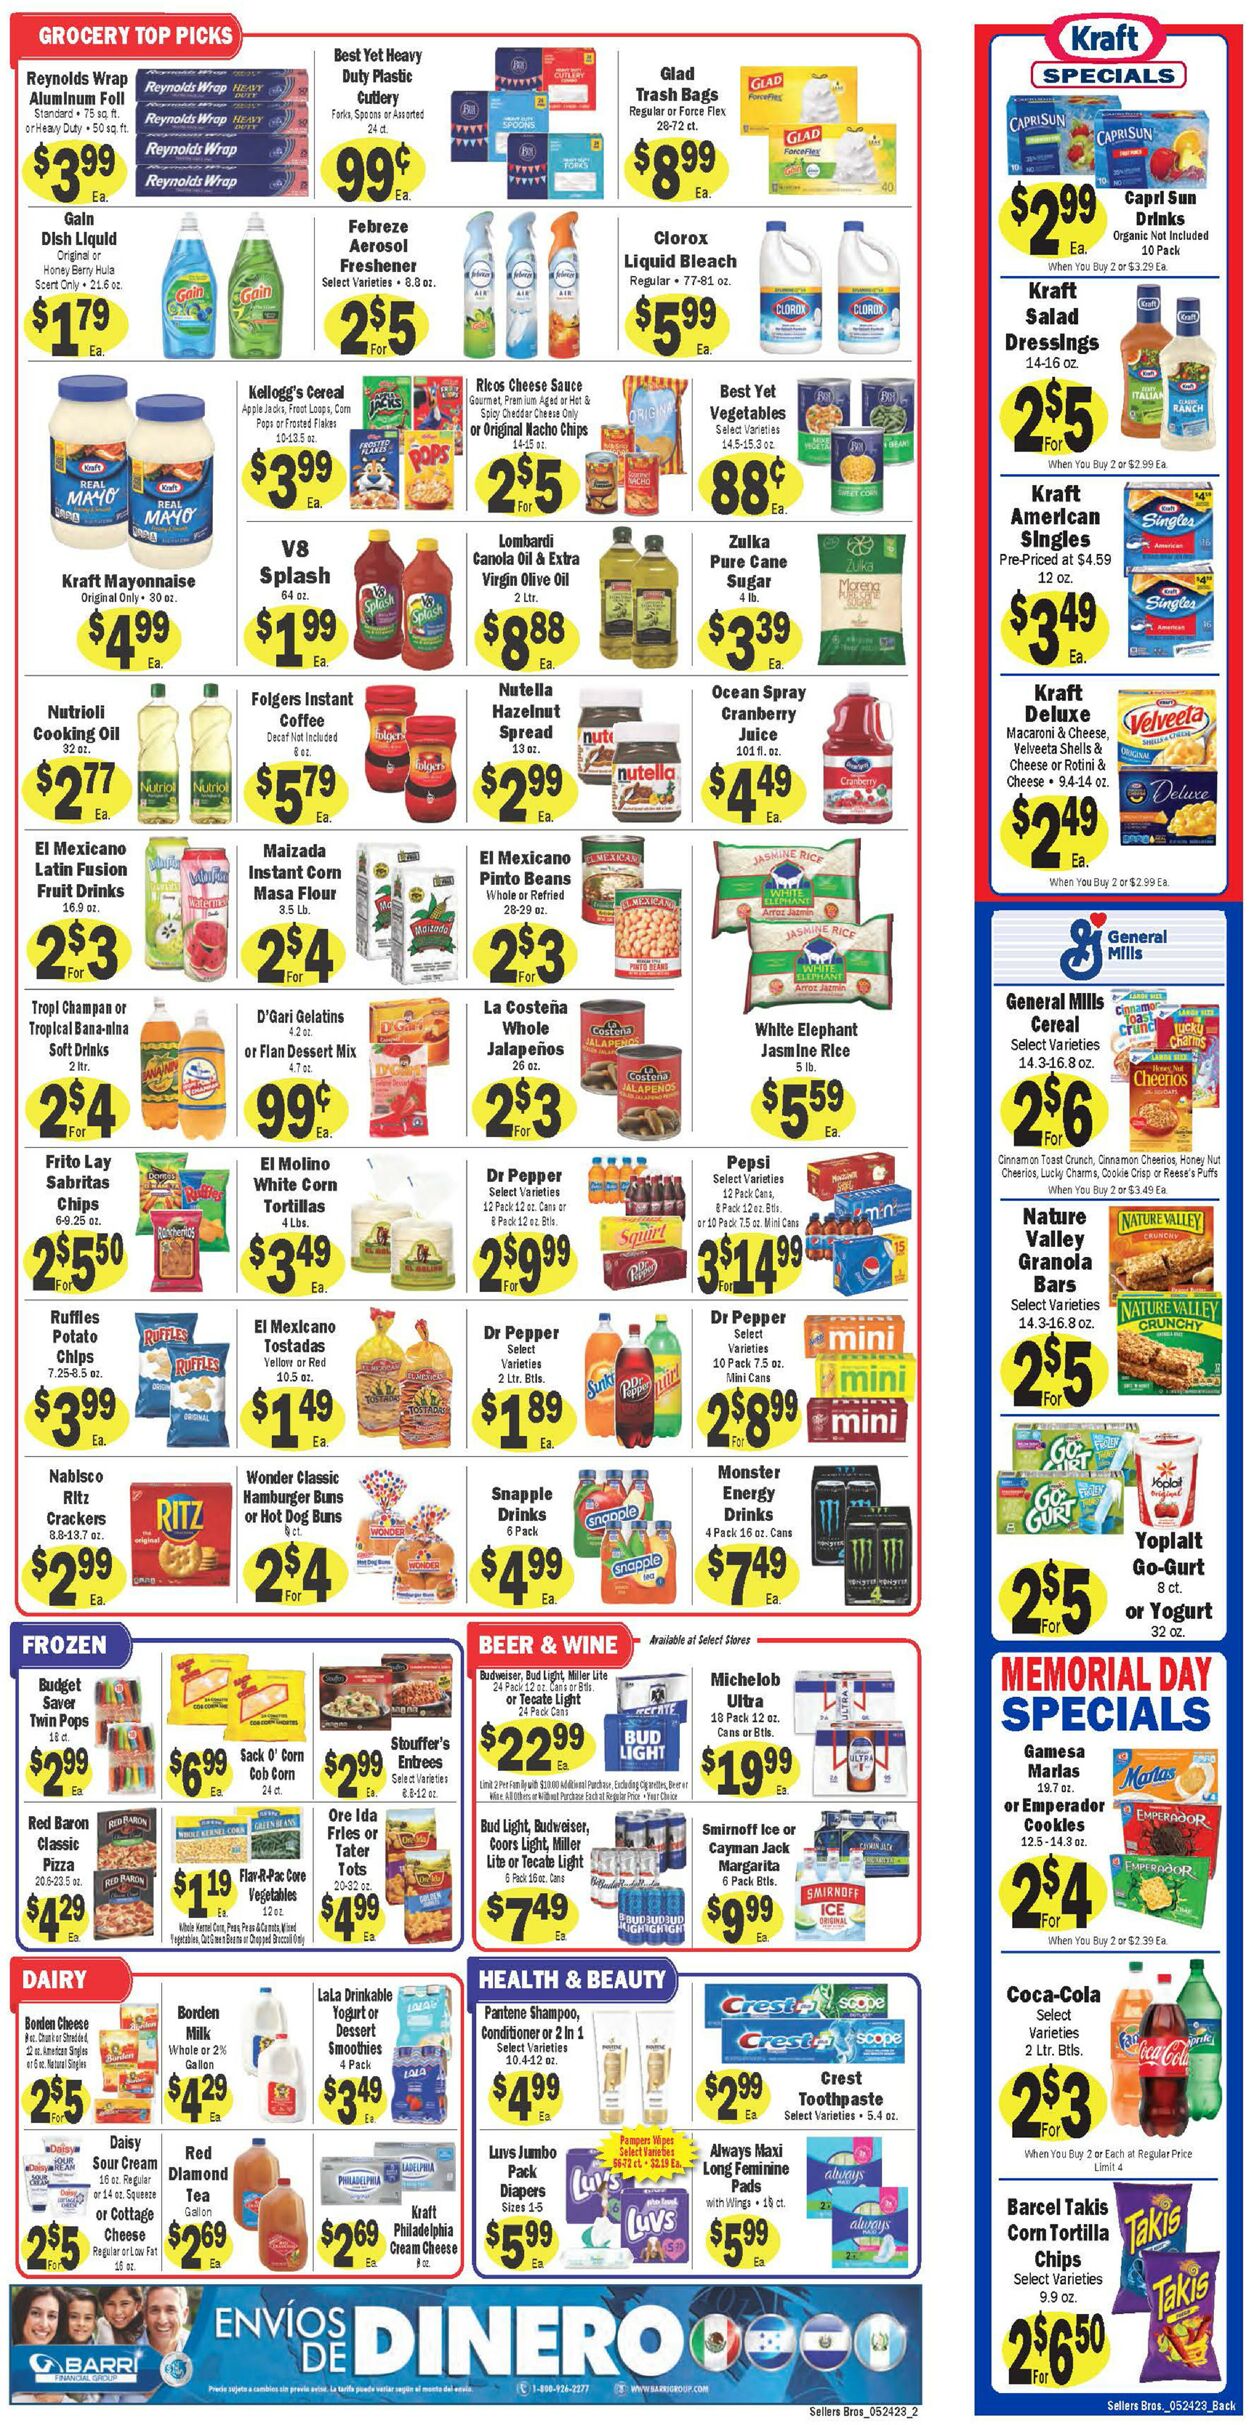 Sellers Bros. Ad from 05/24/2023